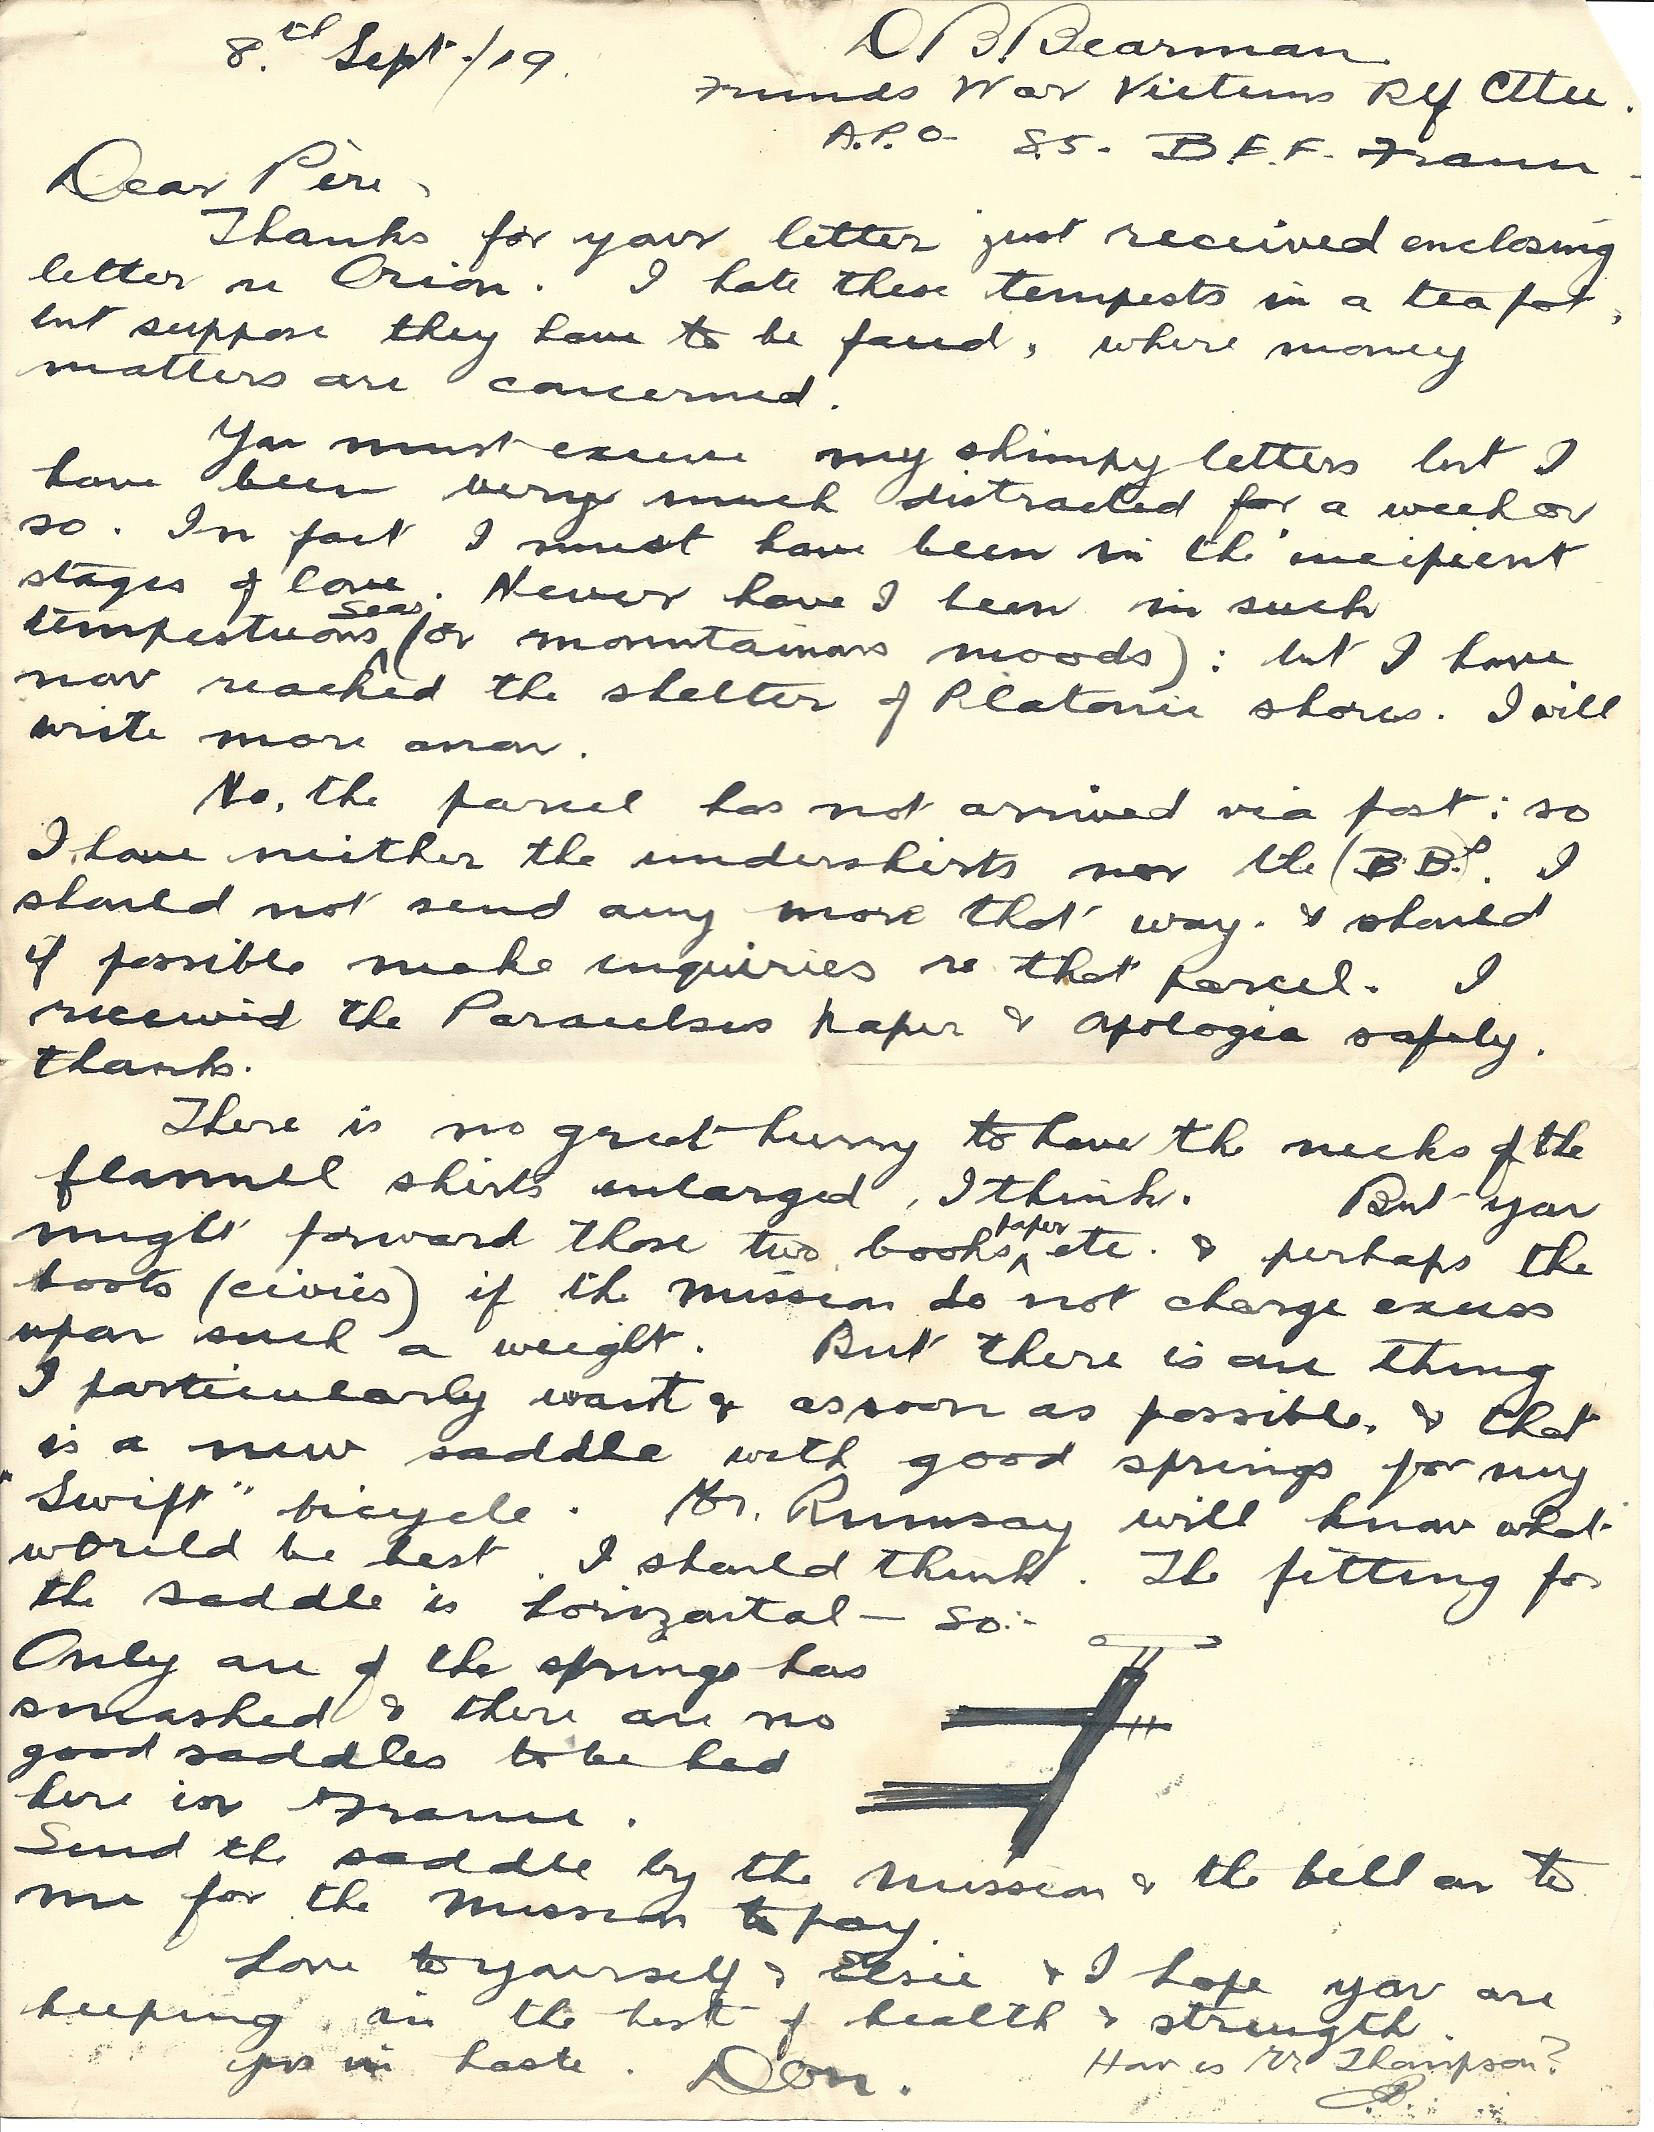 1919-09-08 Donald Bearman letter to his father